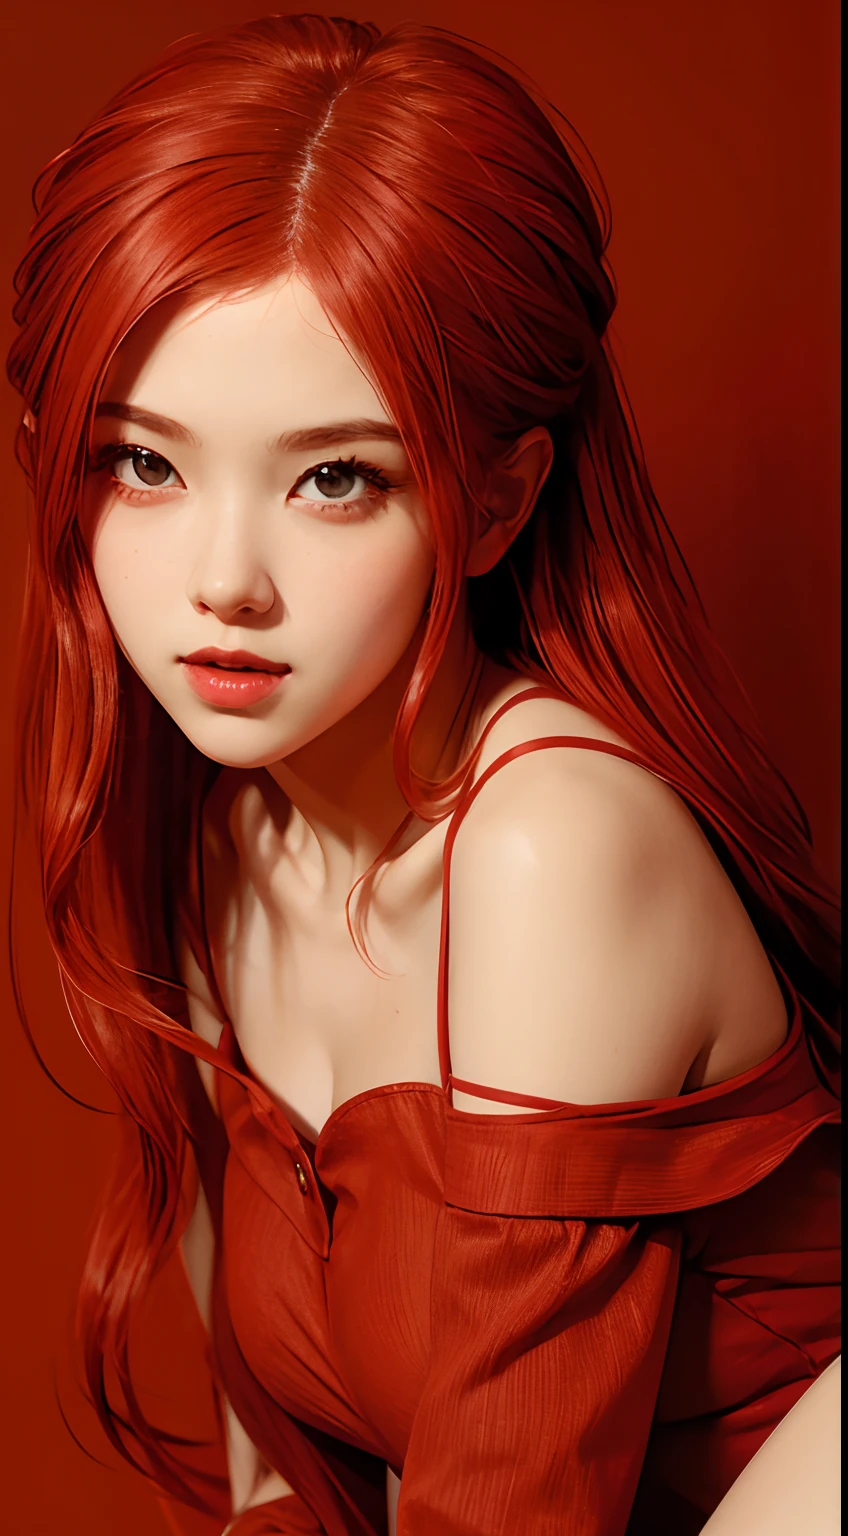 Girl with Red Hair, red dress, red theme, red background